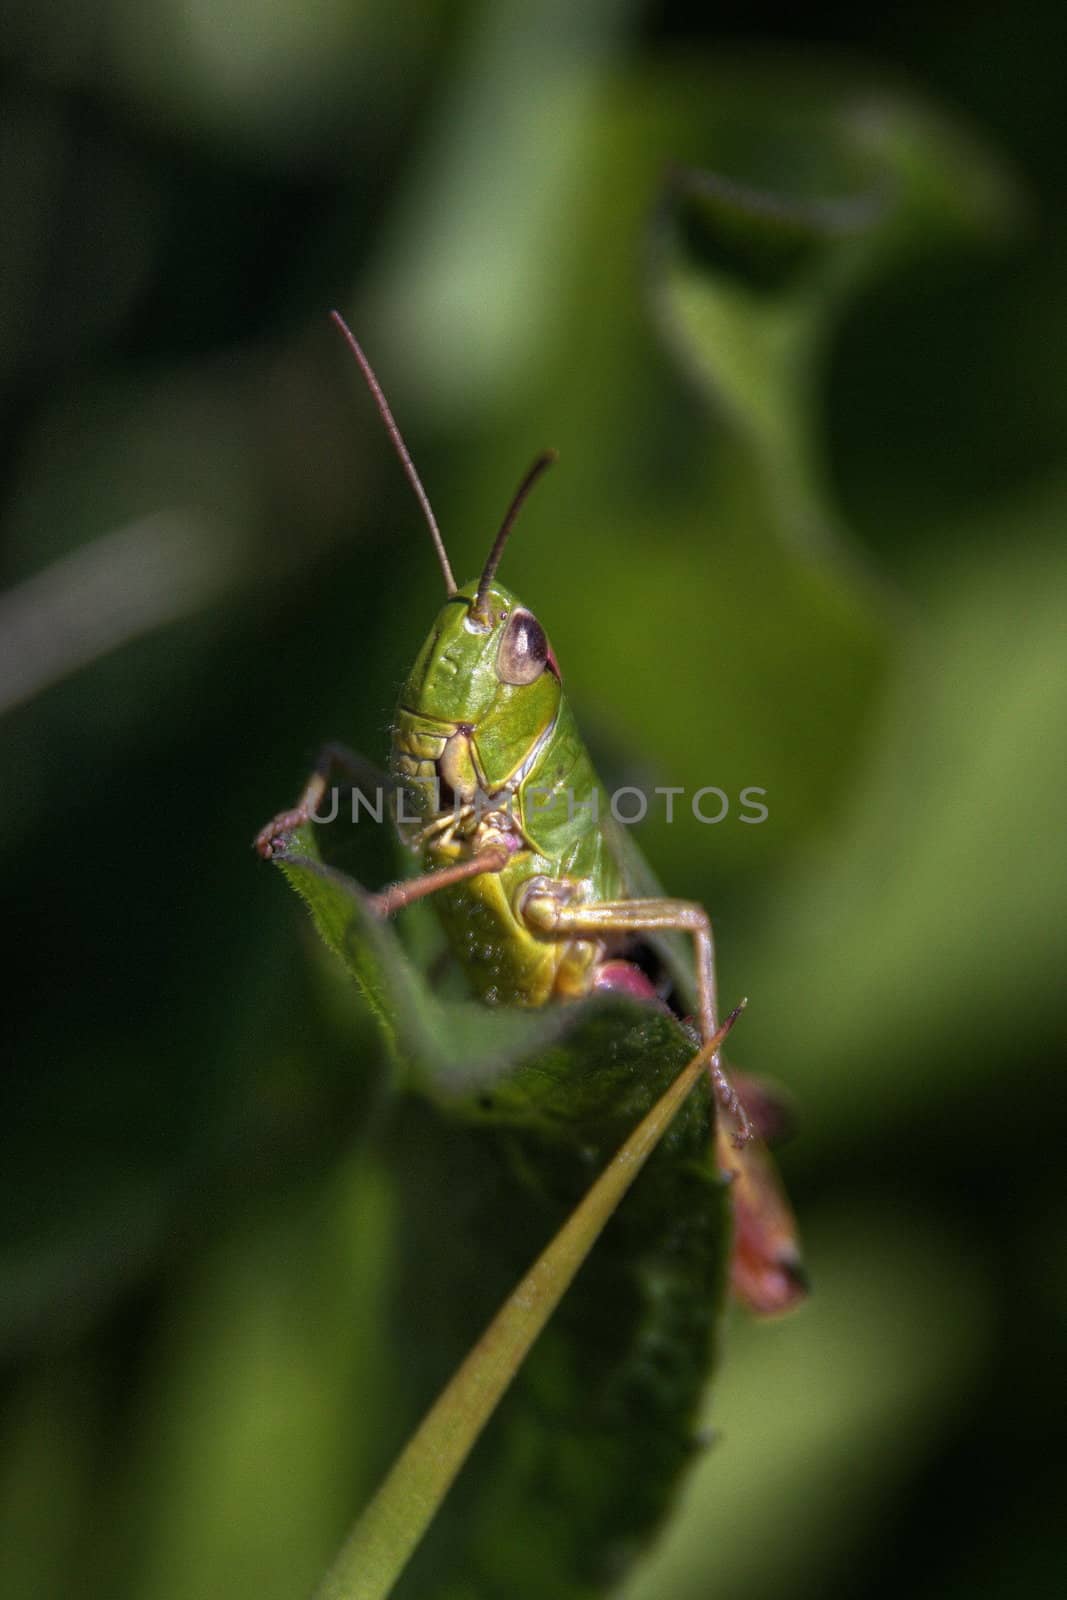 grasshoppers by orobikfilm